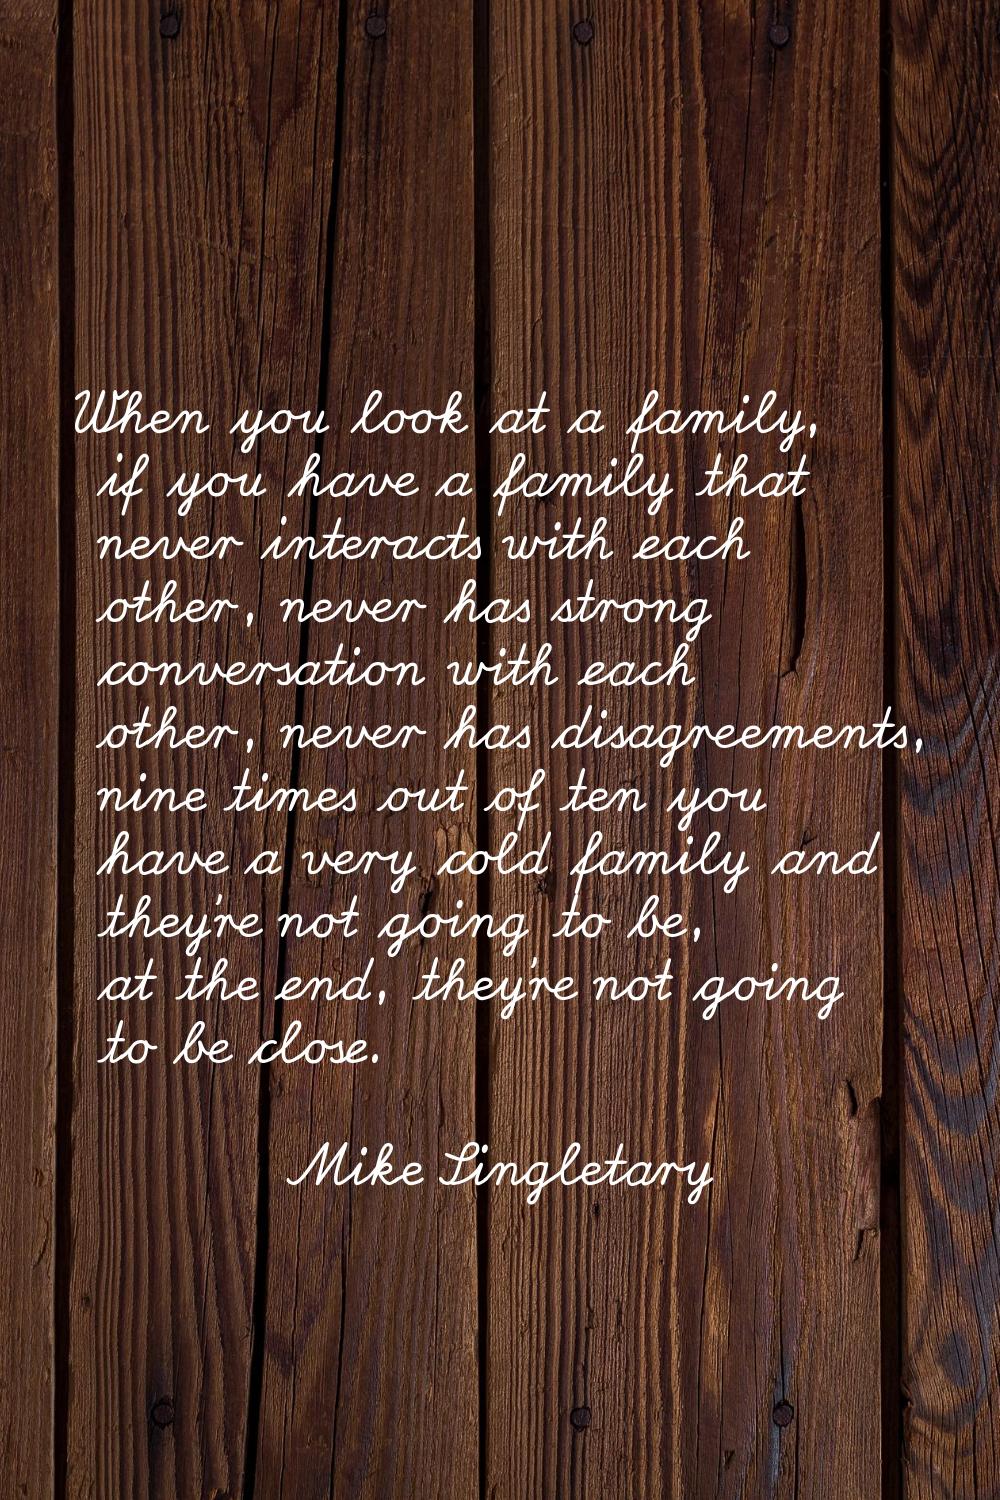 When you look at a family, if you have a family that never interacts with each other, never has str